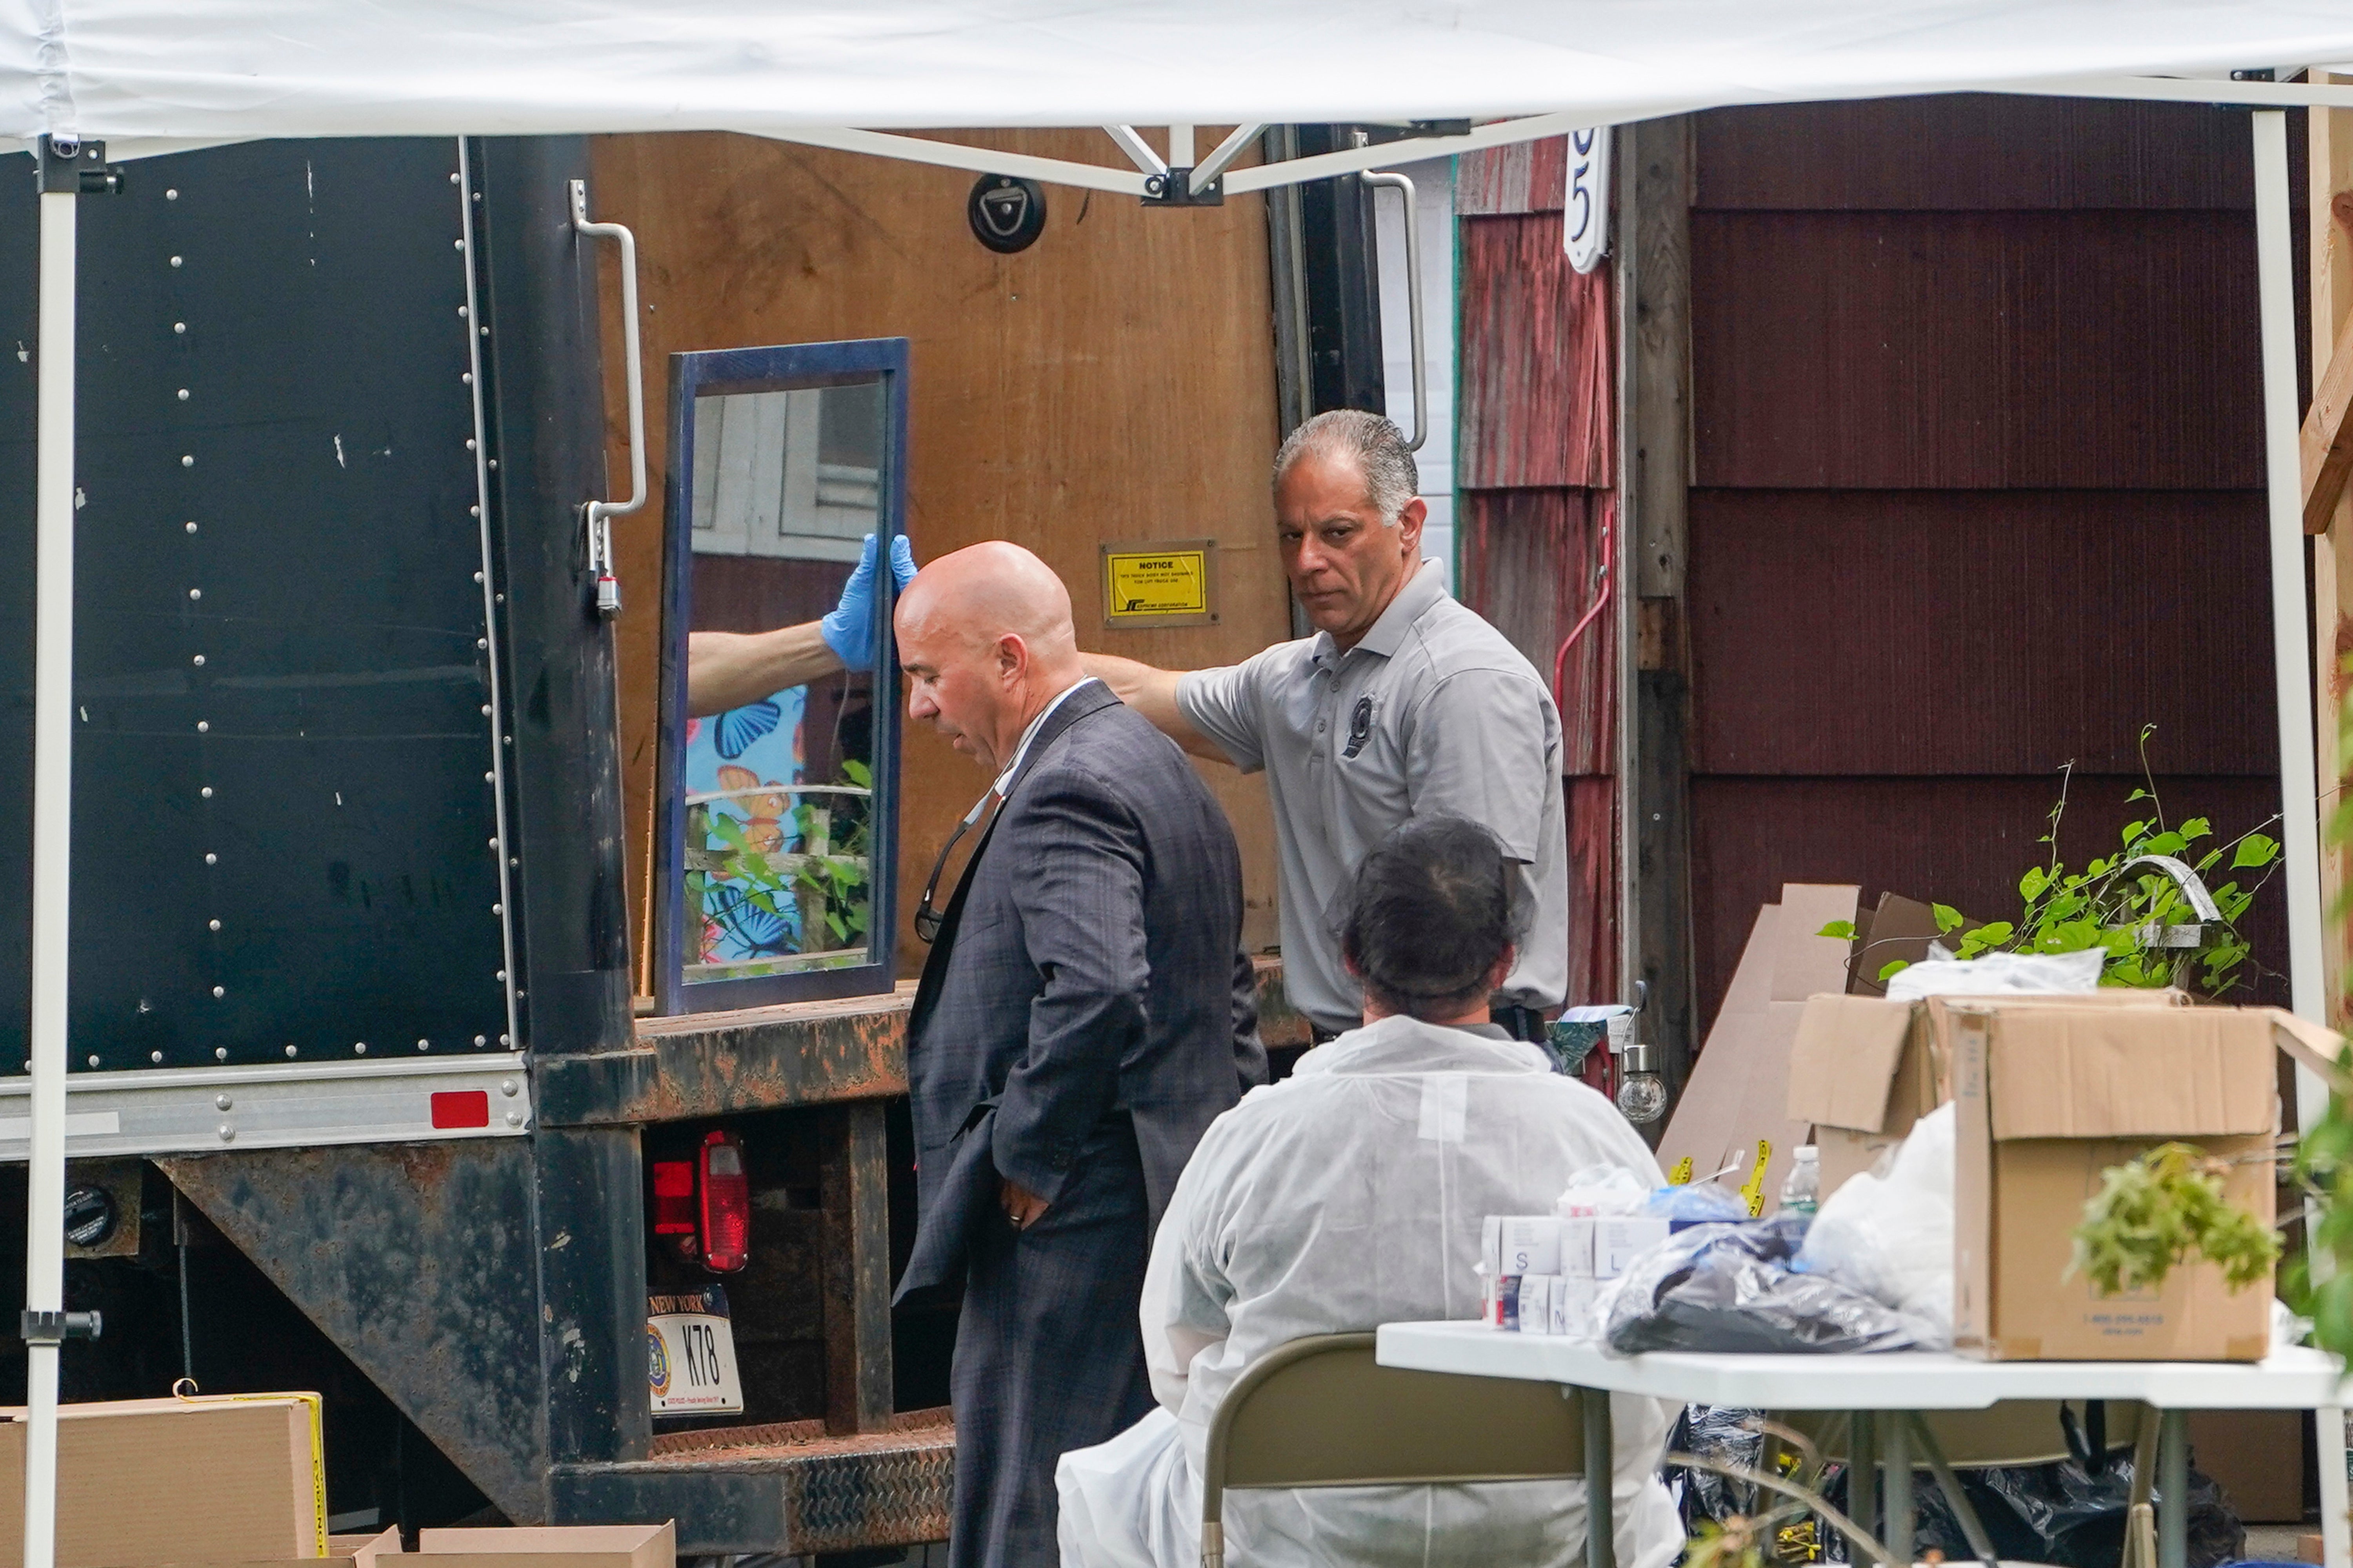 Authorities search the home of suspect Rex Heuermann, Tuesday, July 18, 2023, in Massapequa Park, N.Y